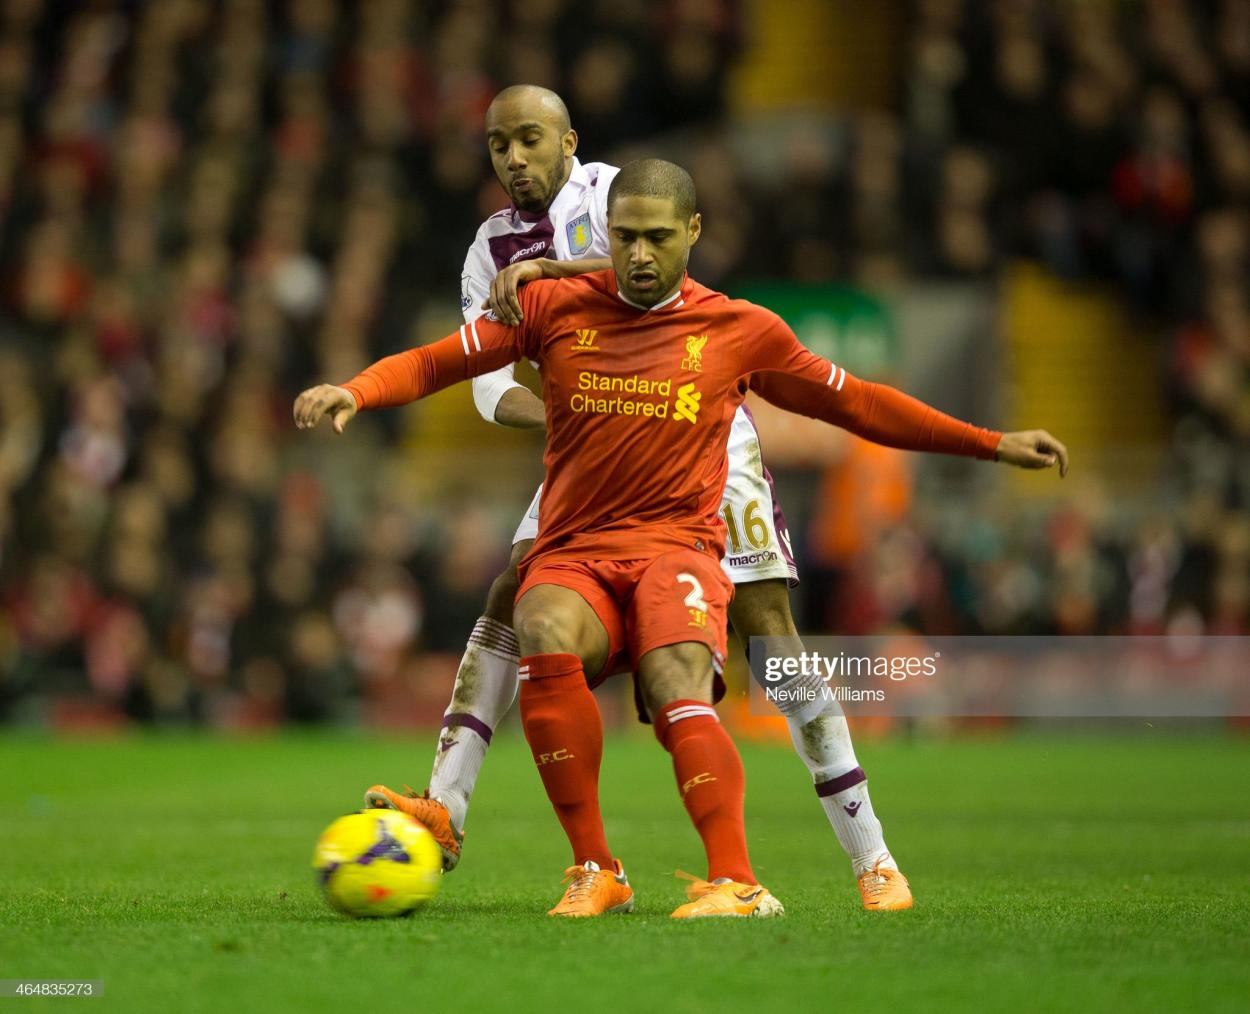 Fabian Delph of Aston Villa is challenged by Glen Johnson of Liverpool during the Barclays <strong><a  data-cke-saved-href='https://www.vavel.com/en/football/2023/05/29/premier-league/1148044-four-things-welearnt-from-aston-villas-win-against-brighton.html' href='https://www.vavel.com/en/football/2023/05/29/premier-league/1148044-four-things-welearnt-from-aston-villas-win-against-brighton.html'>Premier League</a></strong> match between Liverpool and Aston Villa at Anfield on January 18, 2014 in Liverpool, England. (Photo by Neville Williams/Aston Villa FC via Getty Images)